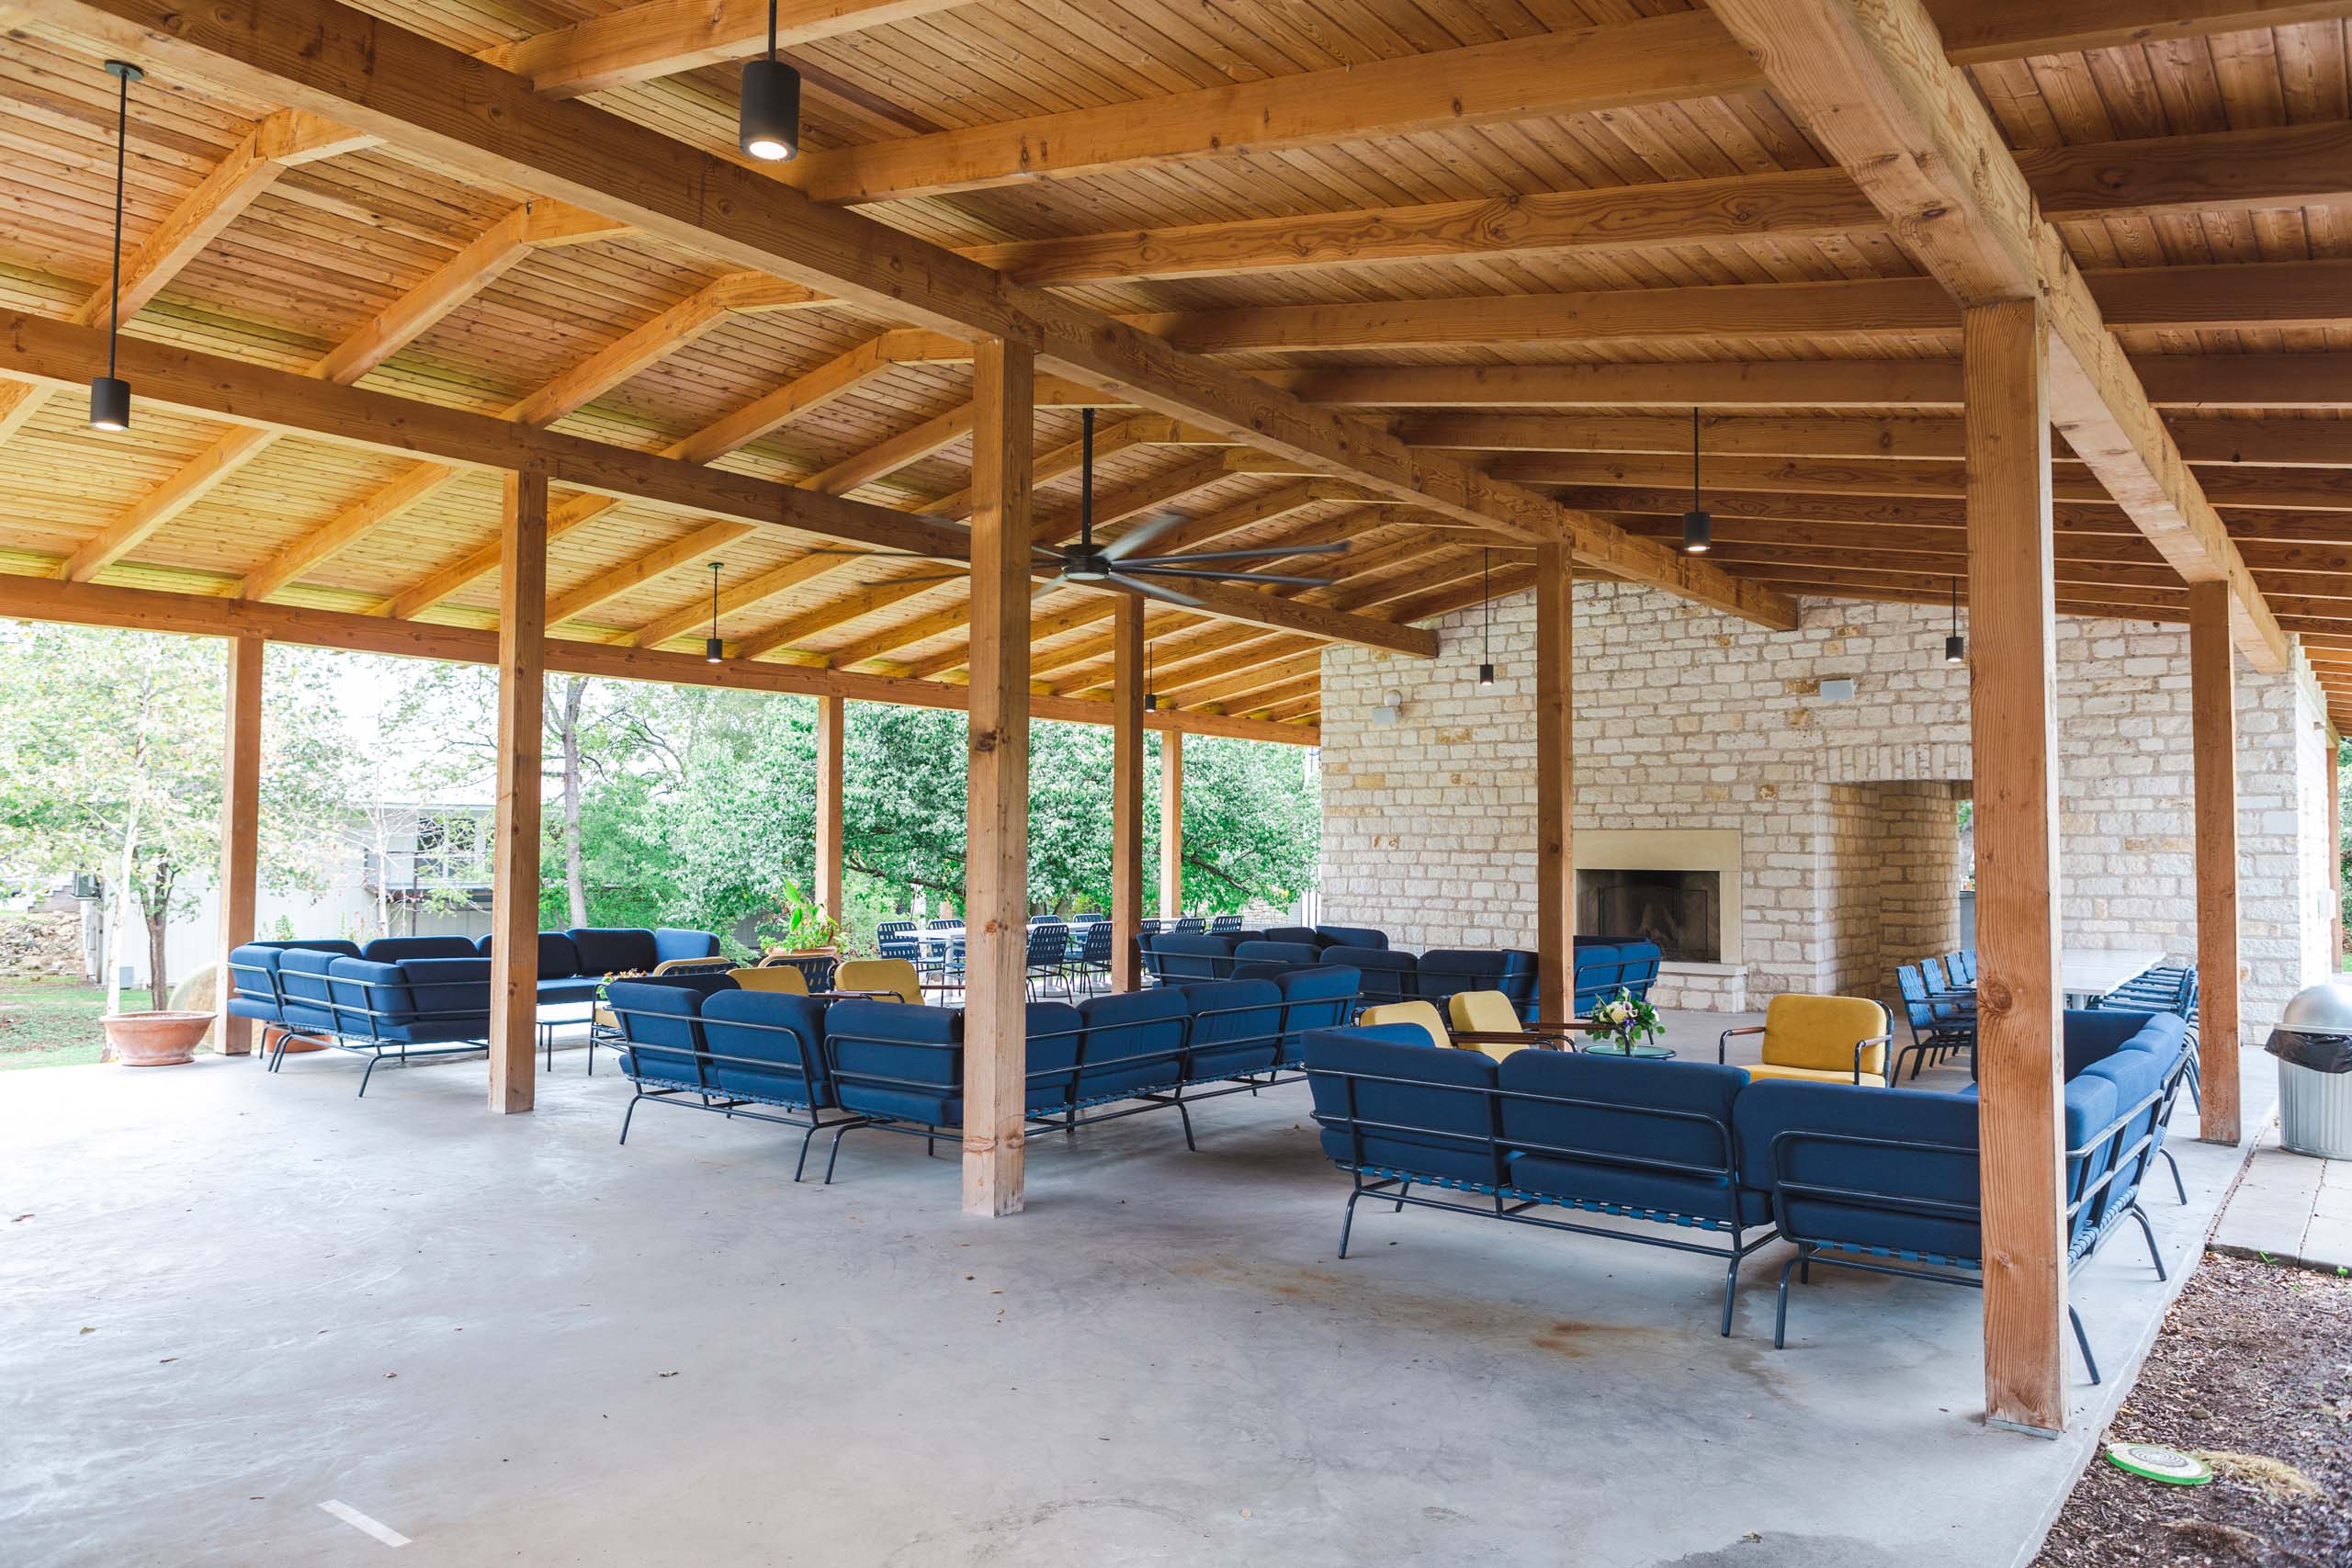 Outdoor pavilion with blue seating and wooden beams at the Stagecoach Inn in Salado, Texas.